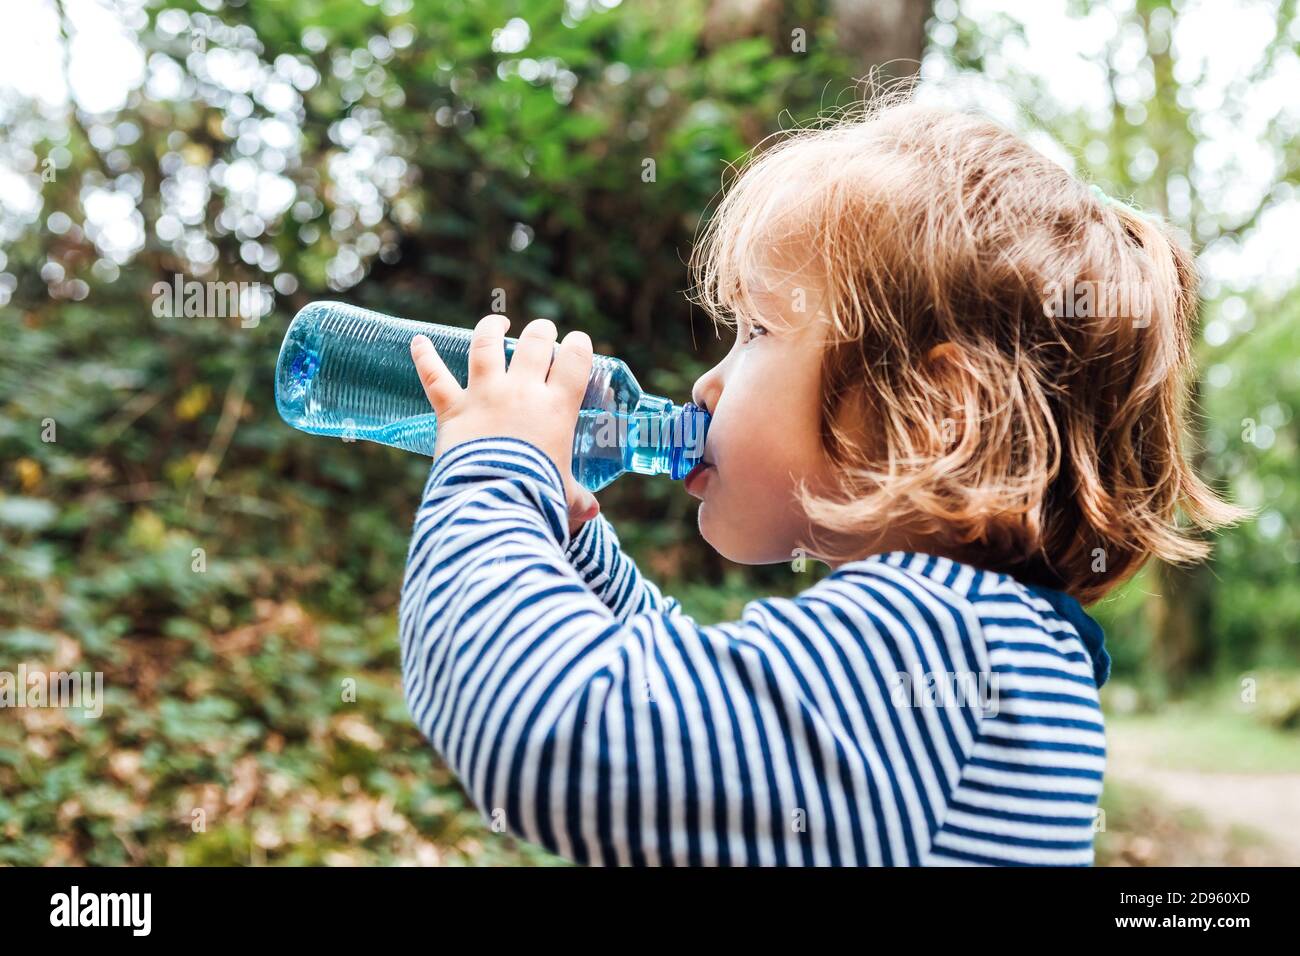 https://c8.alamy.com/comp/2D960XD/little-blond-haired-girl-drinking-water-from-a-plastic-bottle-during-an-excursion-in-nature-2D960XD.jpg